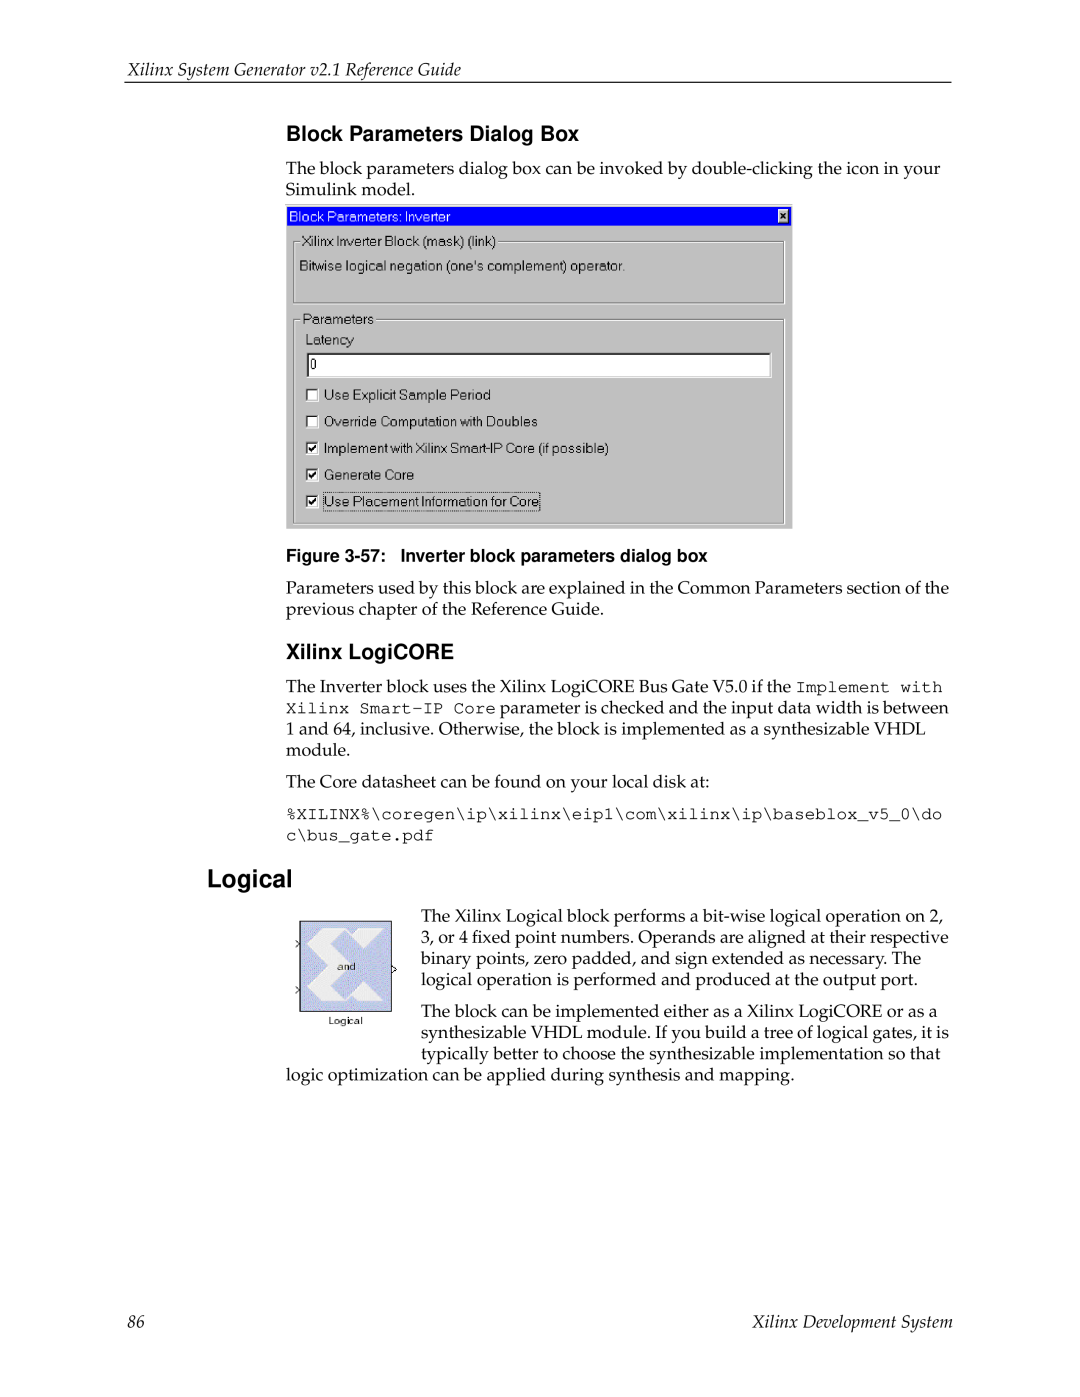 Xilinx V2.1 manual Logical, Block Parameters Dialog Box, Xilinx LogiCORE, Xilinx System Generator v2.1 Reference Guide 